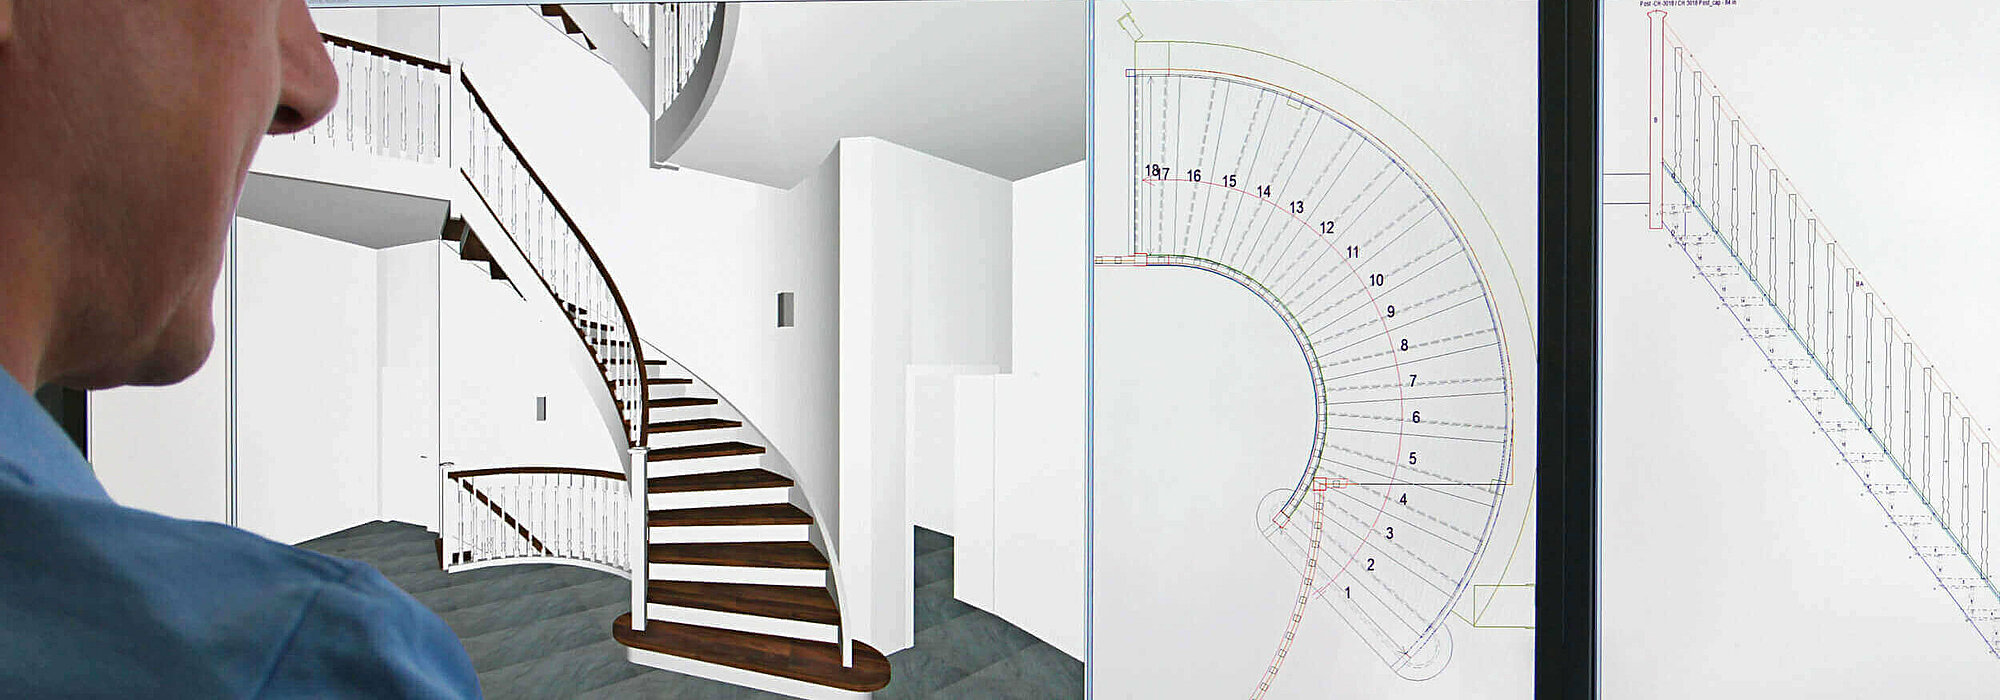 Using the Compass Stair Software 